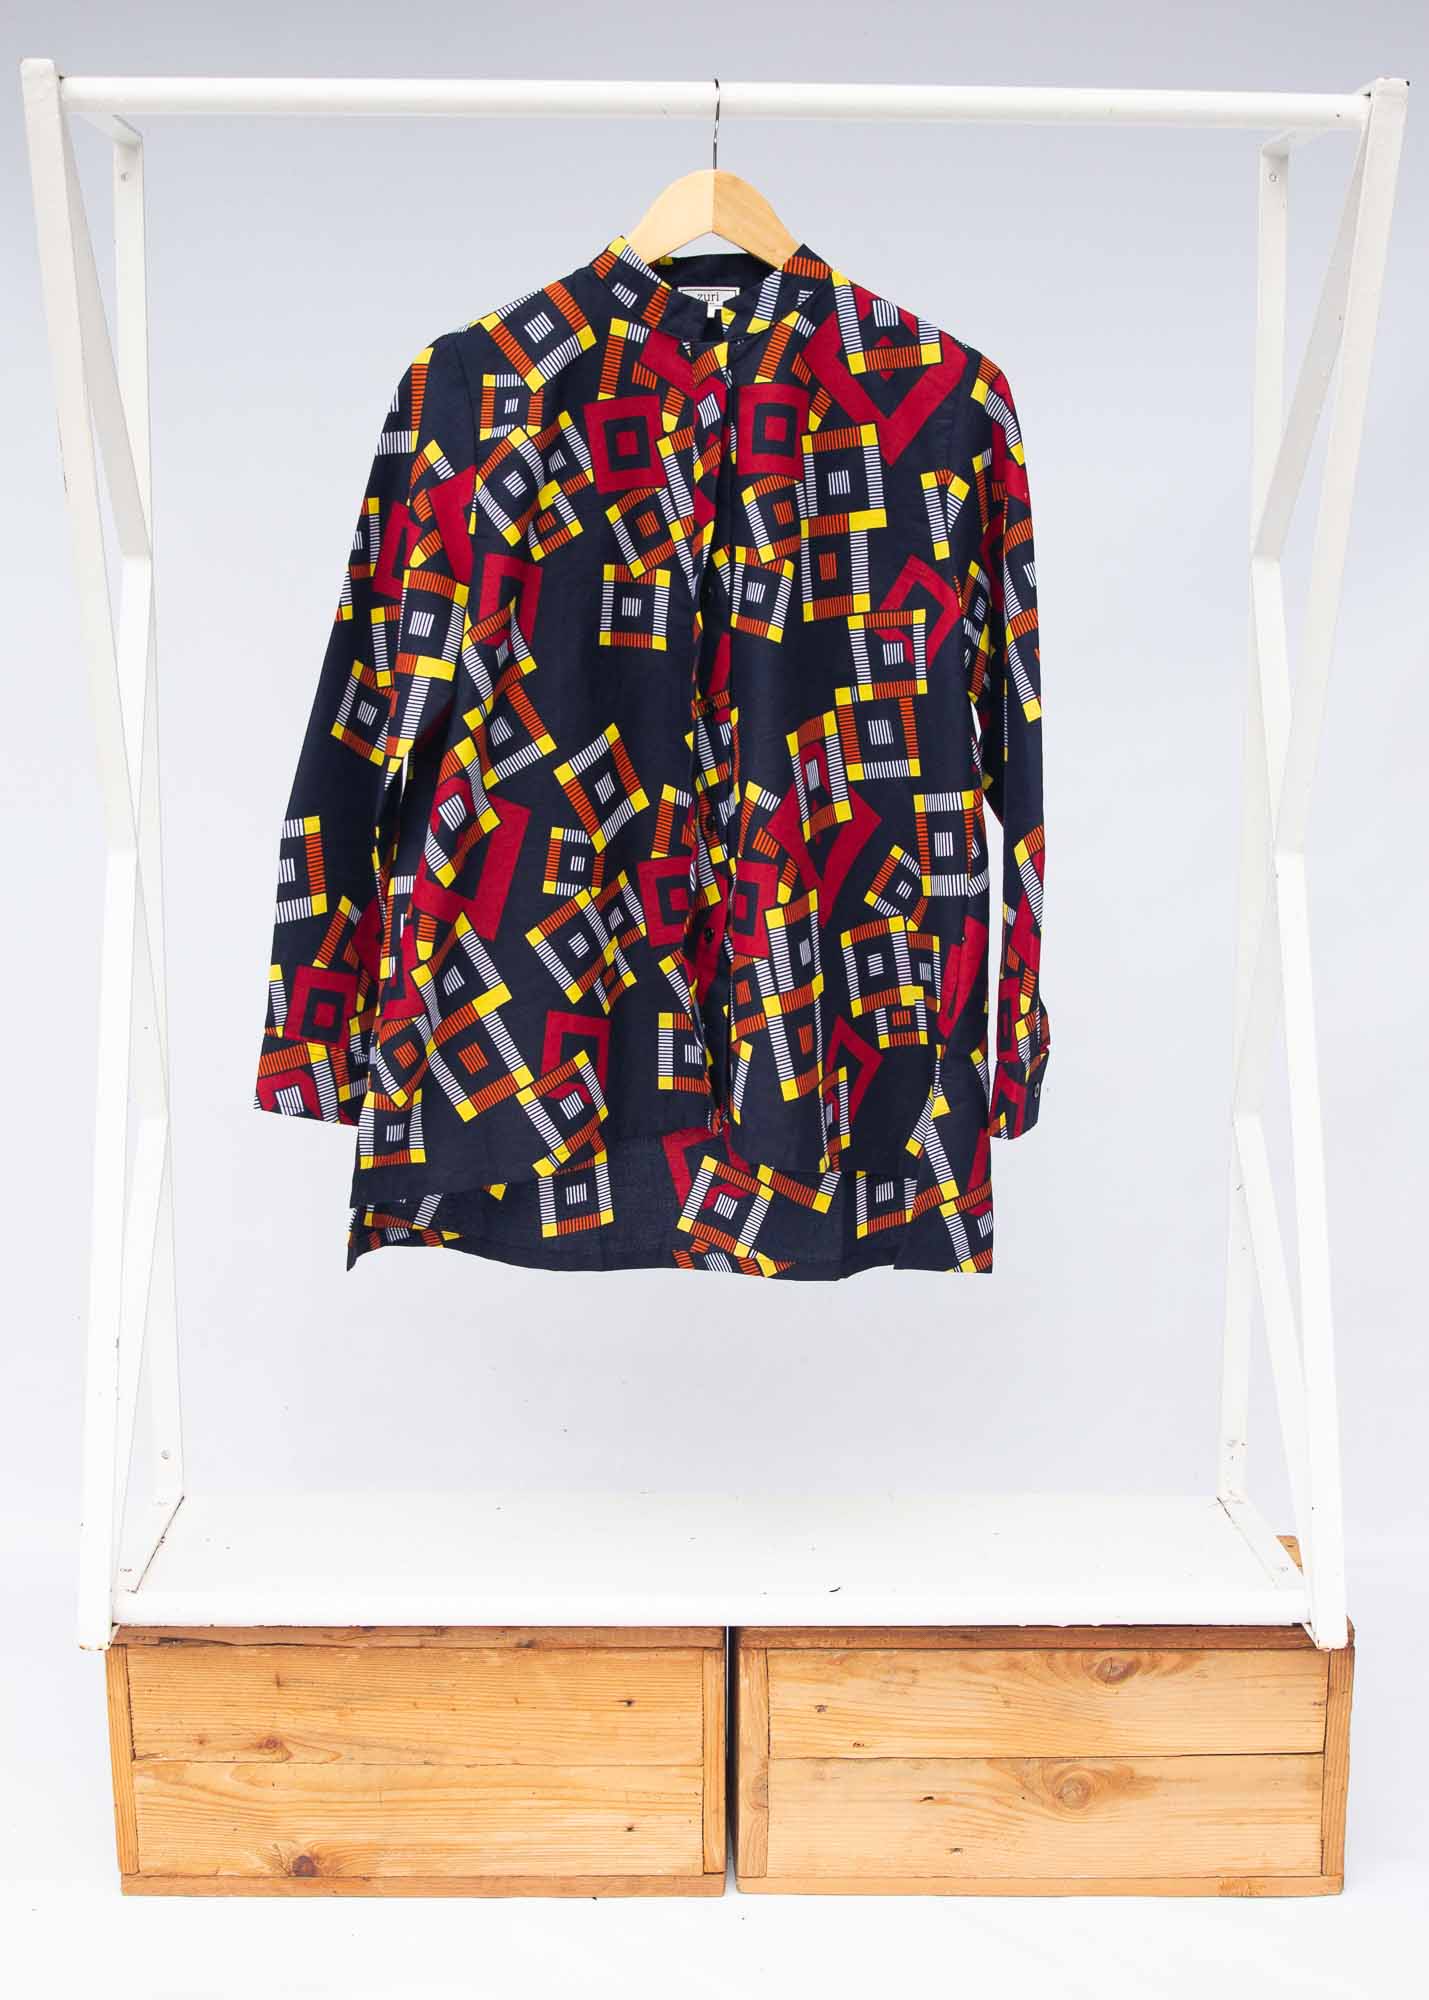 The display of navy shirt with red, orange, yellow and white geometric print 